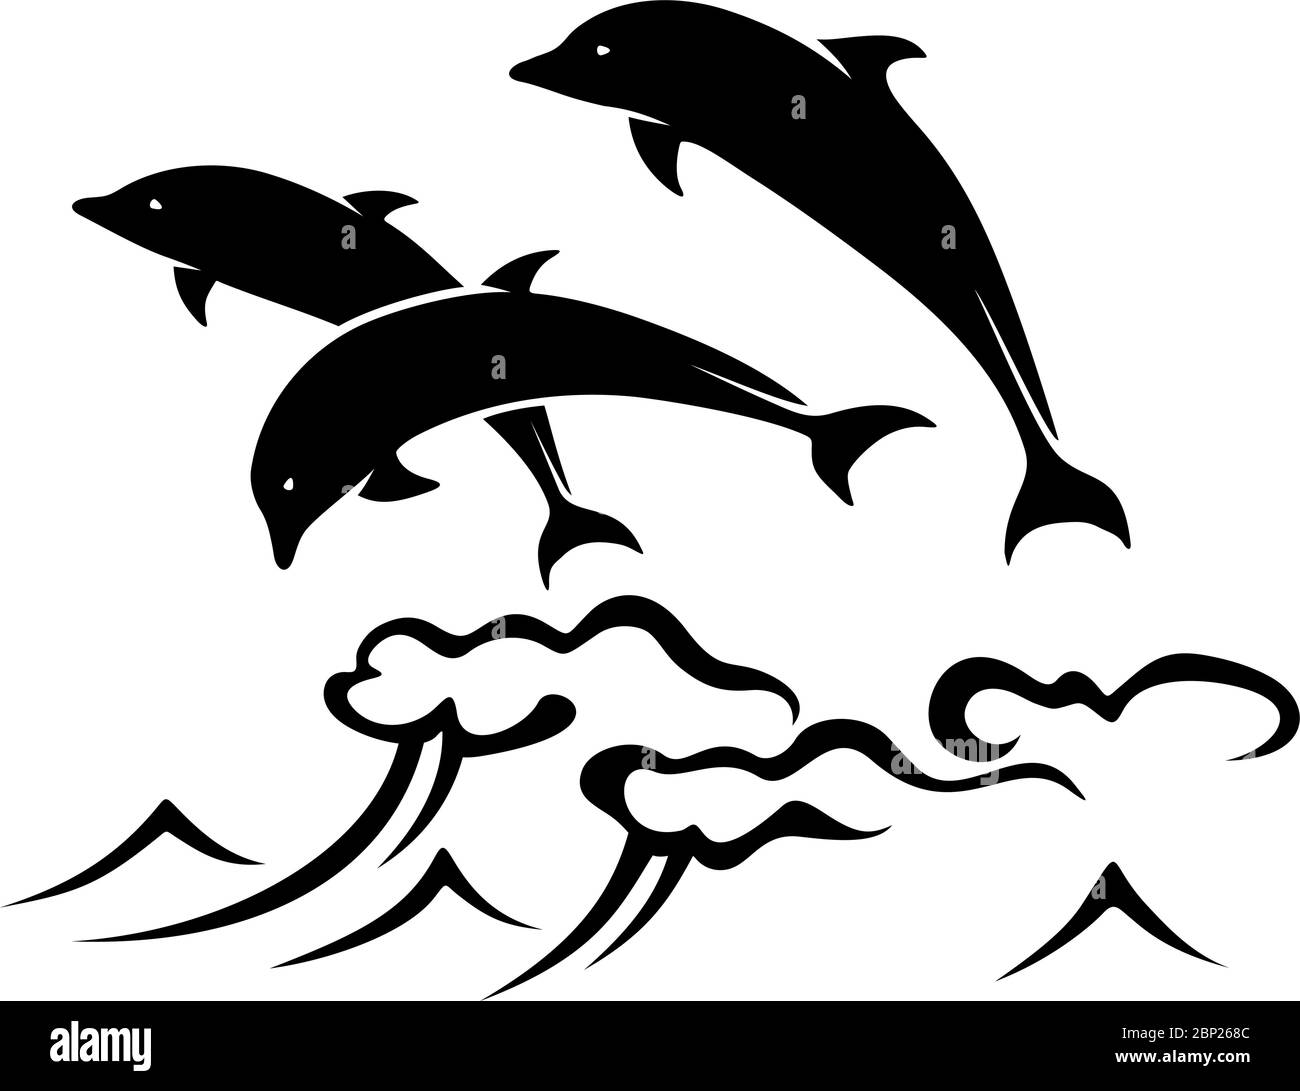 Three dolphins jumping out of the ocean waves. Vector black and white illustration. Stock Vector